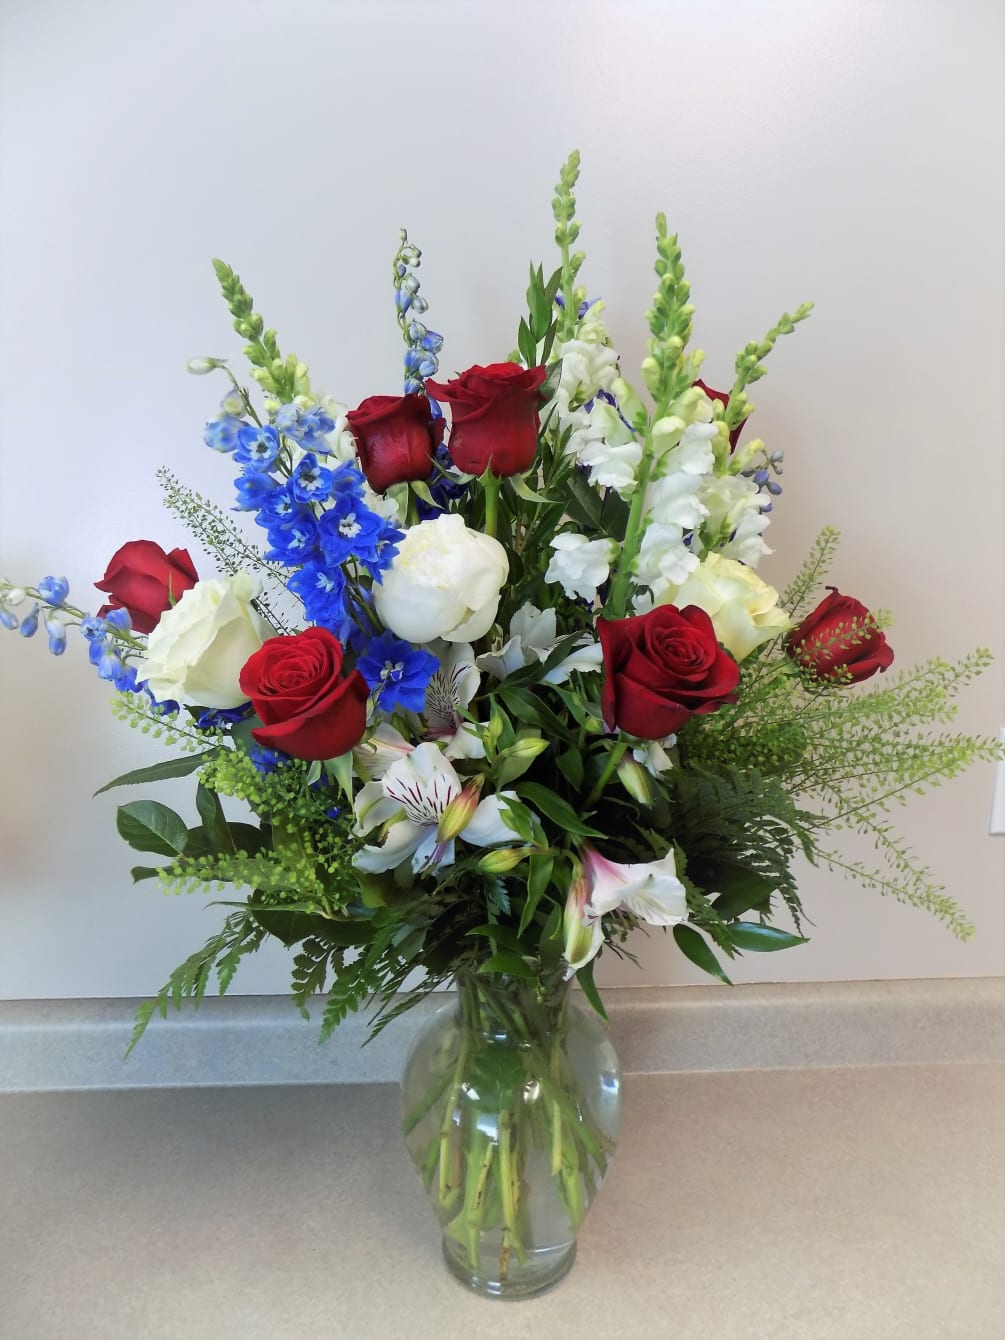 A bouquet brimming with bright blue delphinium, roses, and snapdragons is perfect